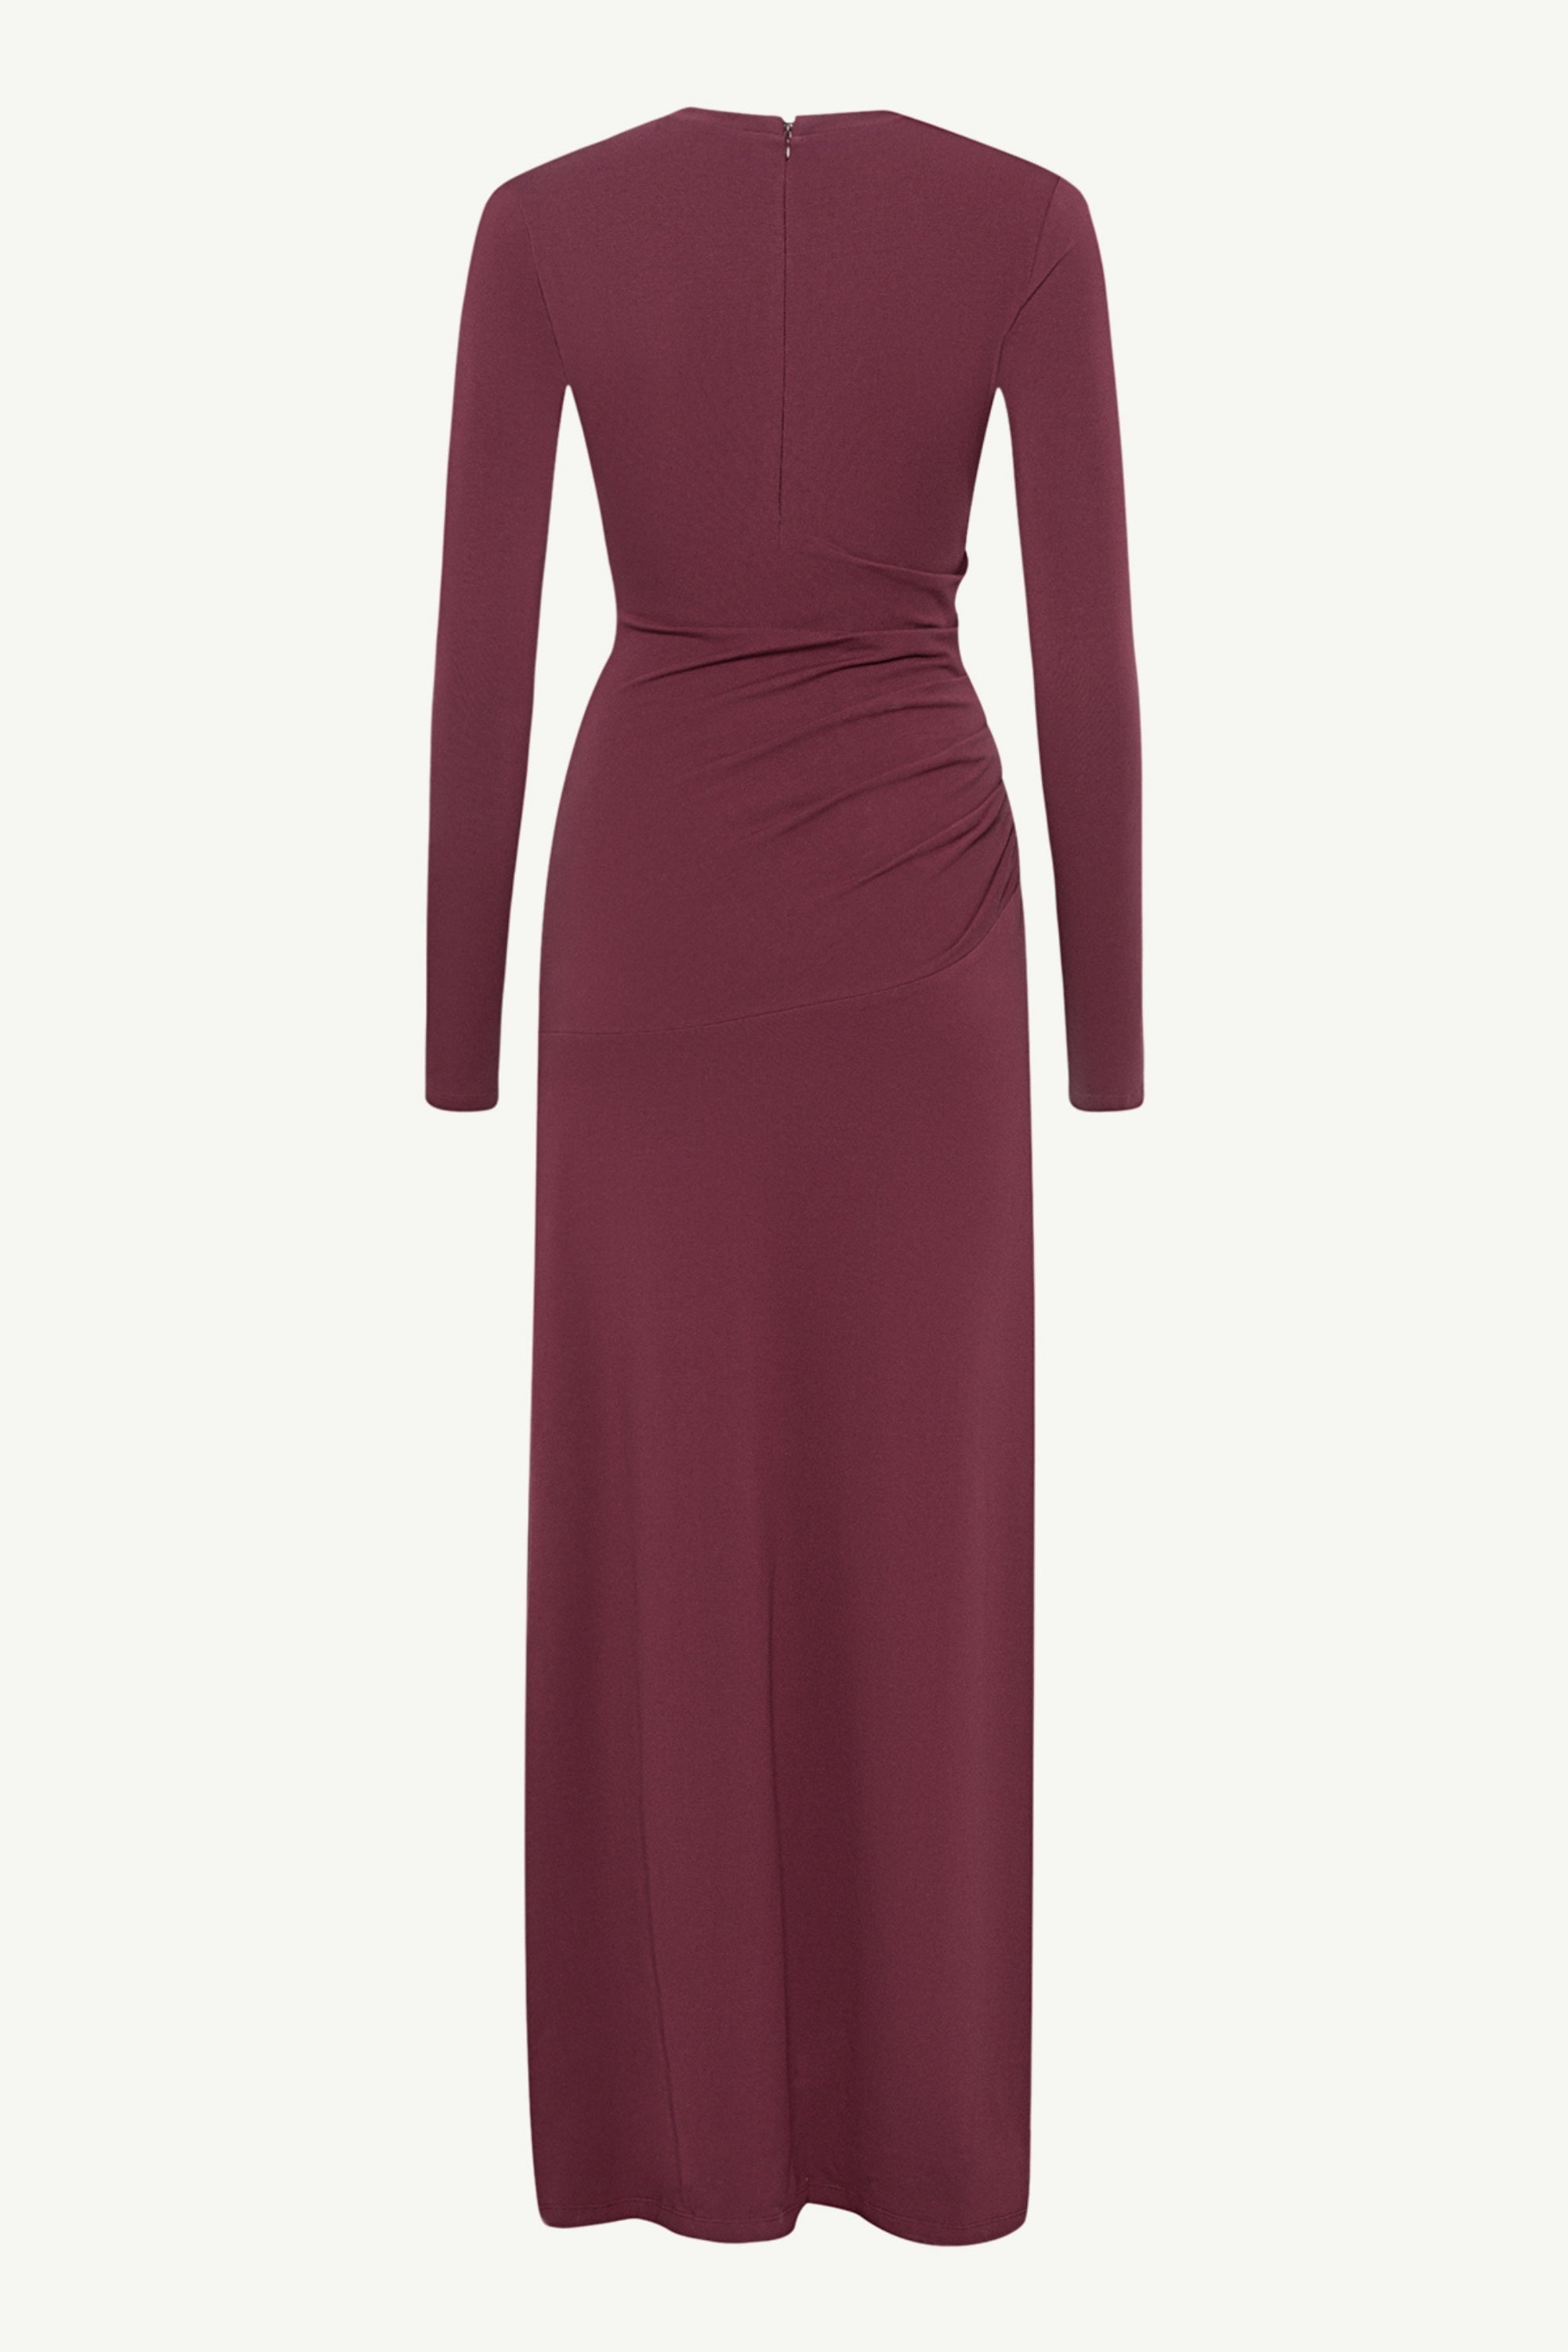 Natalie Rouched Jersey Maxi Dress - Port Royale Clothing epschoolboard 